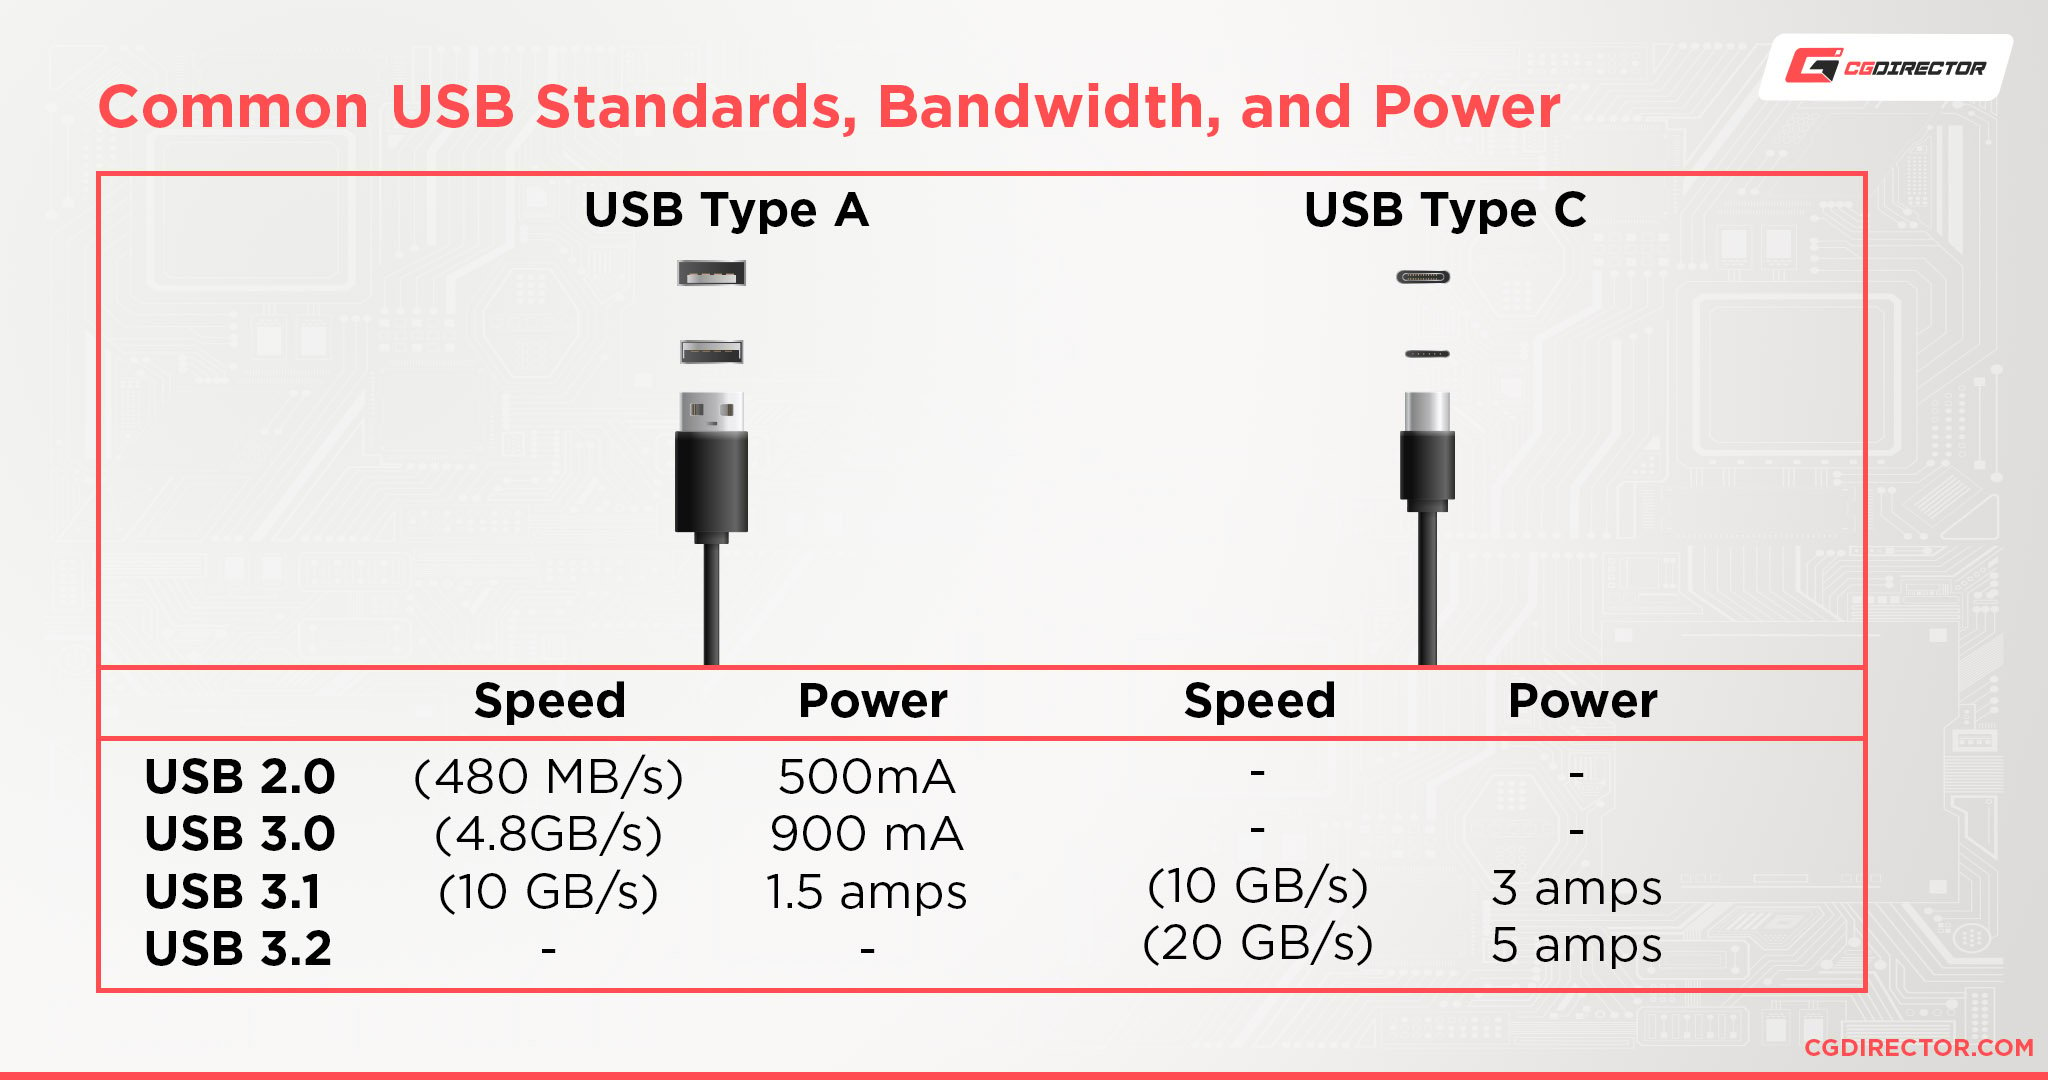 Common USB Standards, Bandwidth, and Power